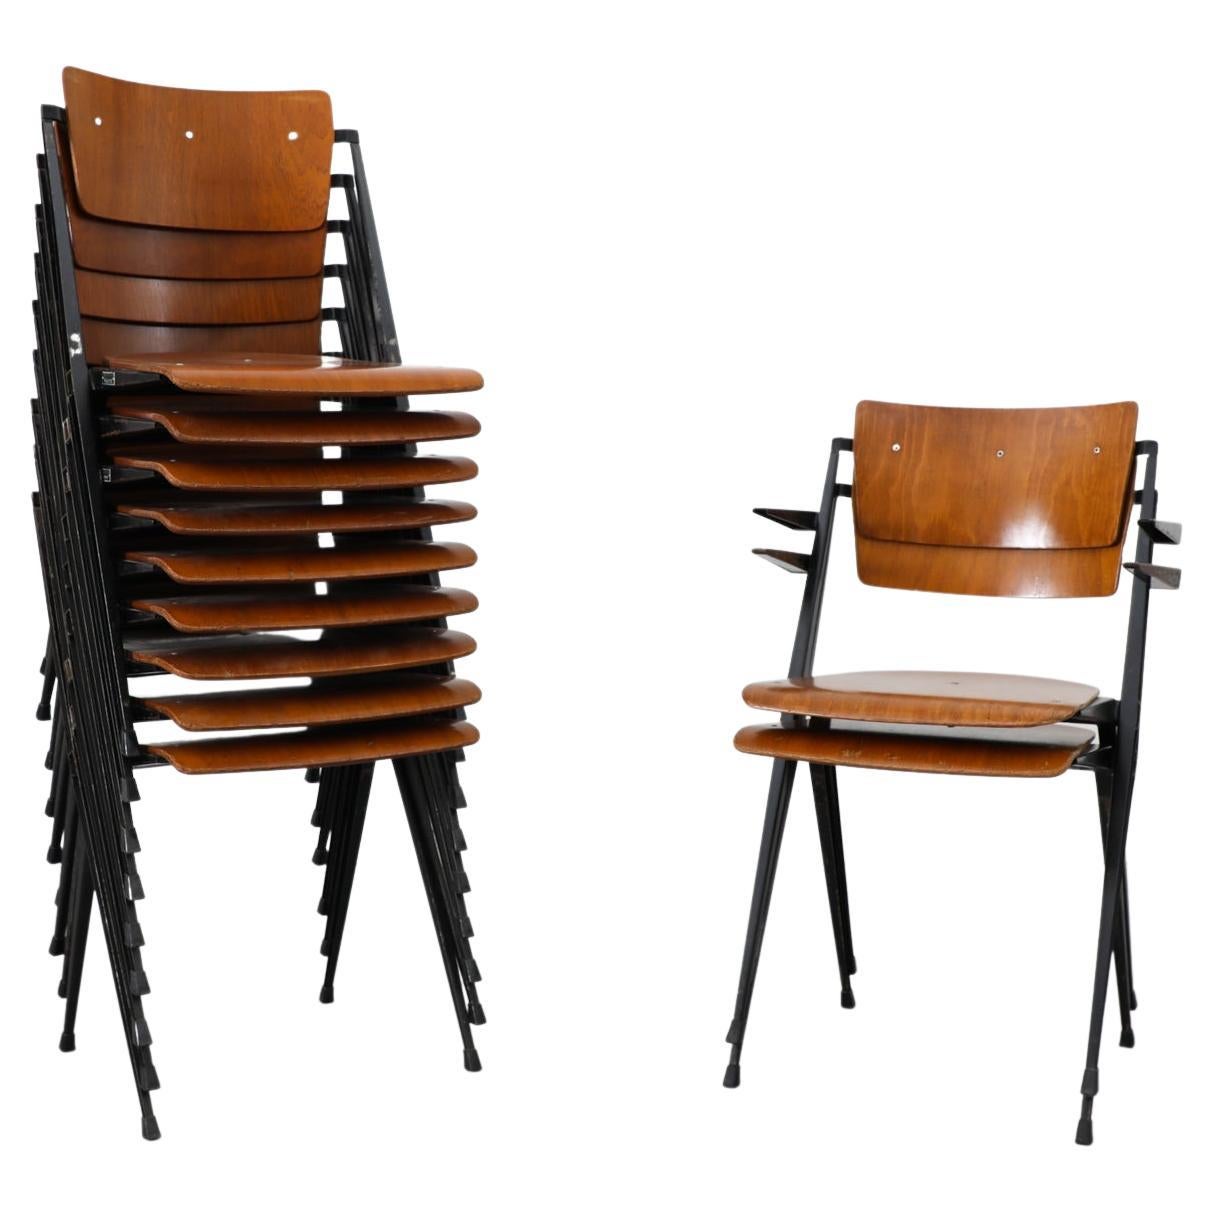 Metal Arm Chairs - 552 For Sale on 1stDibs